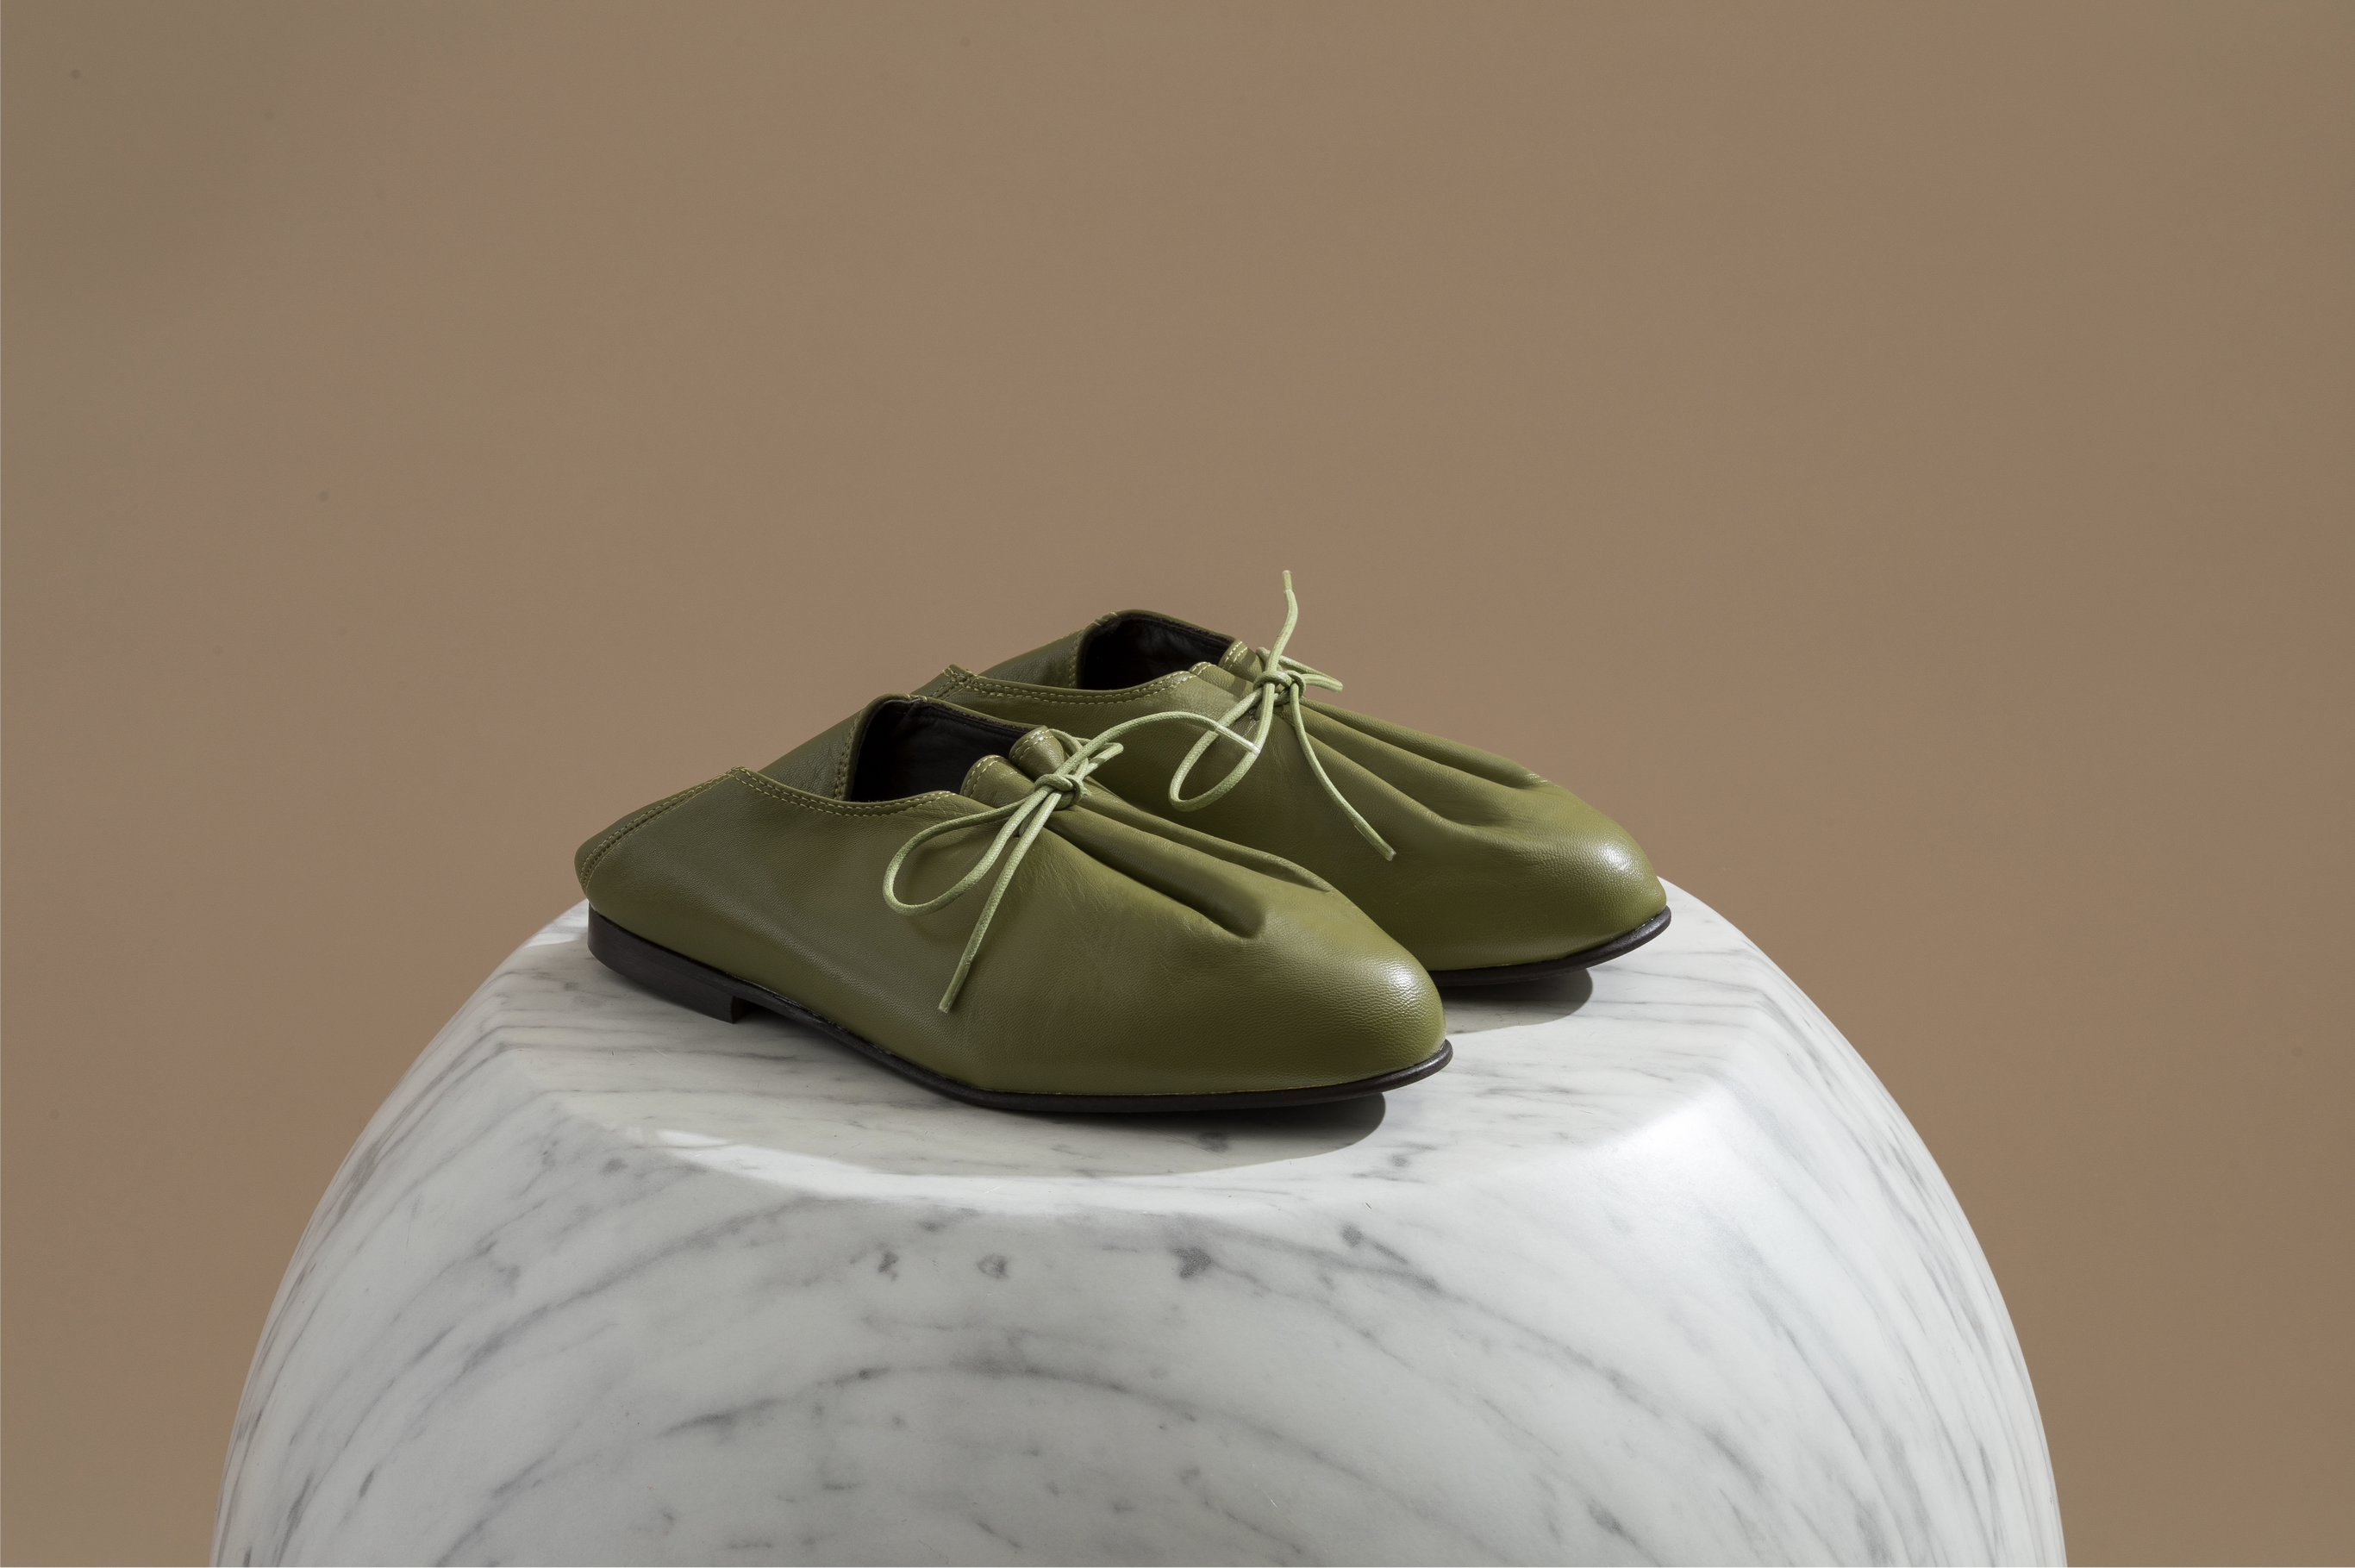 JACQUES SOLOVIERE Bed Shoes - Matcha - MMW Concept